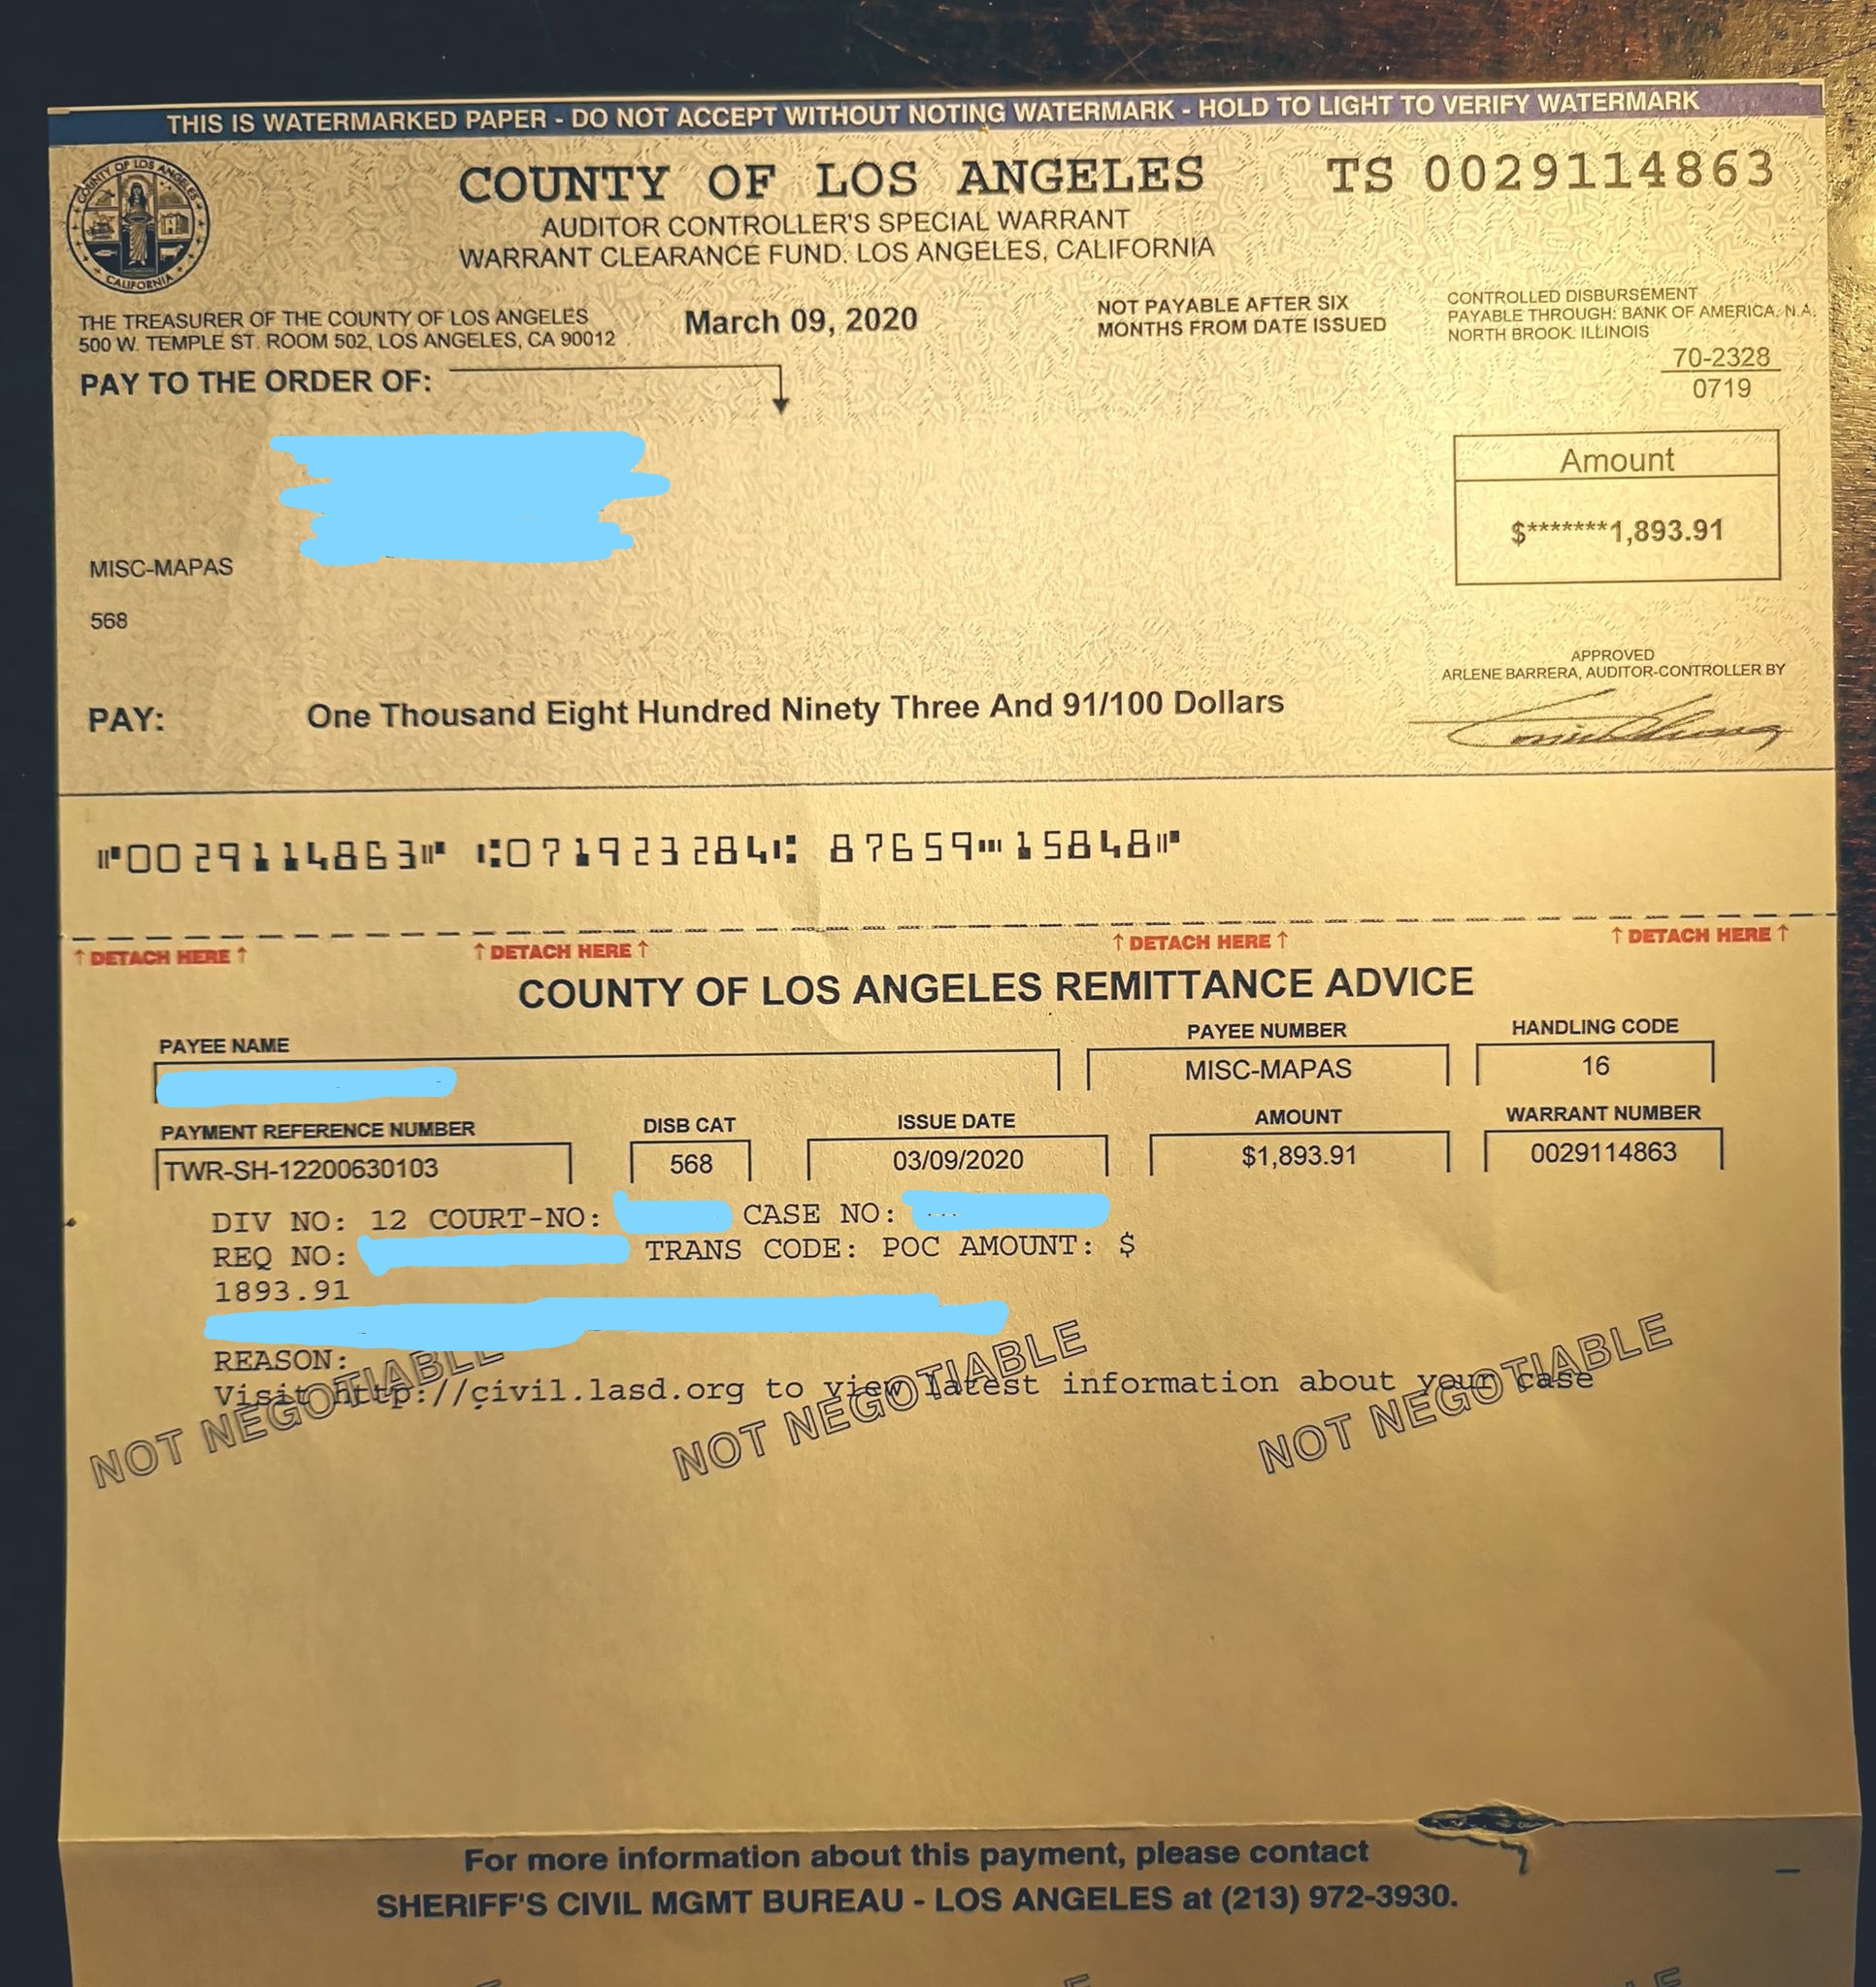 document - Ot Accept Without Noting Watermark Hold Tought County Of Los Angeles Ts 0029114863 S Auditor Controllers Special Warrant Warrant Clearance Fund Los Angeles, California Be The Cost Of Los Angeles Pay To The Order Of 20237 Pay One Thousand Eight 